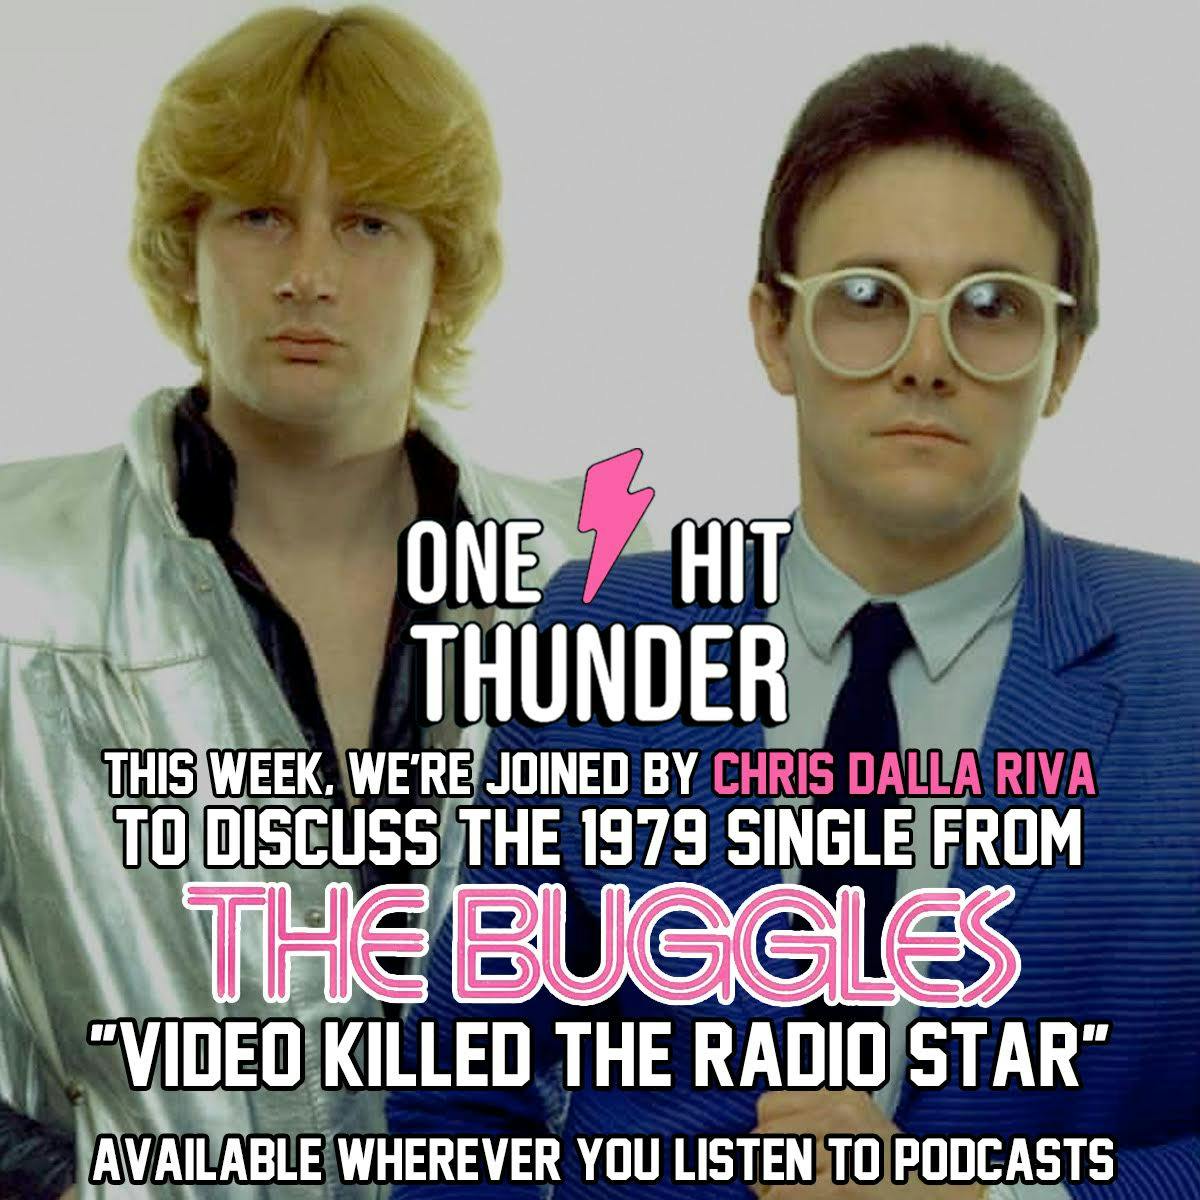 ”Video Killed the Radio Star” by The Buggles (f/Chris Dalla Riva)